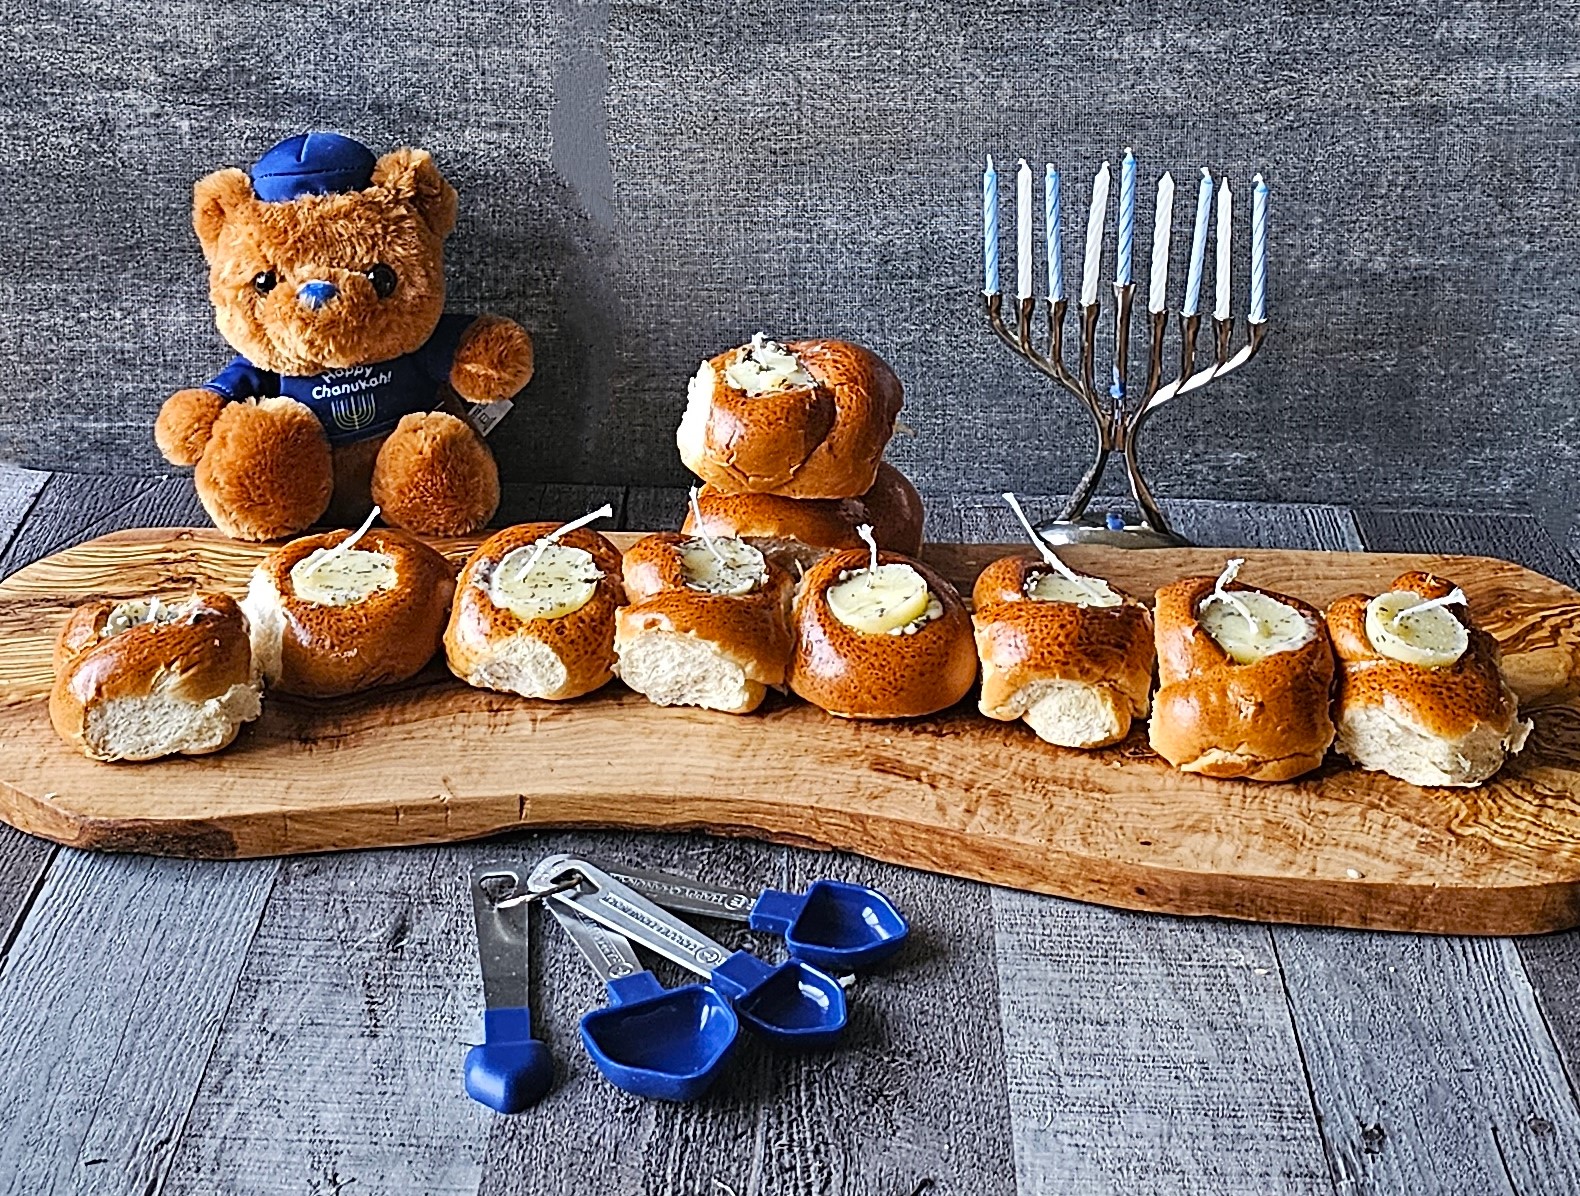 Edible Menorah with Butter Candles